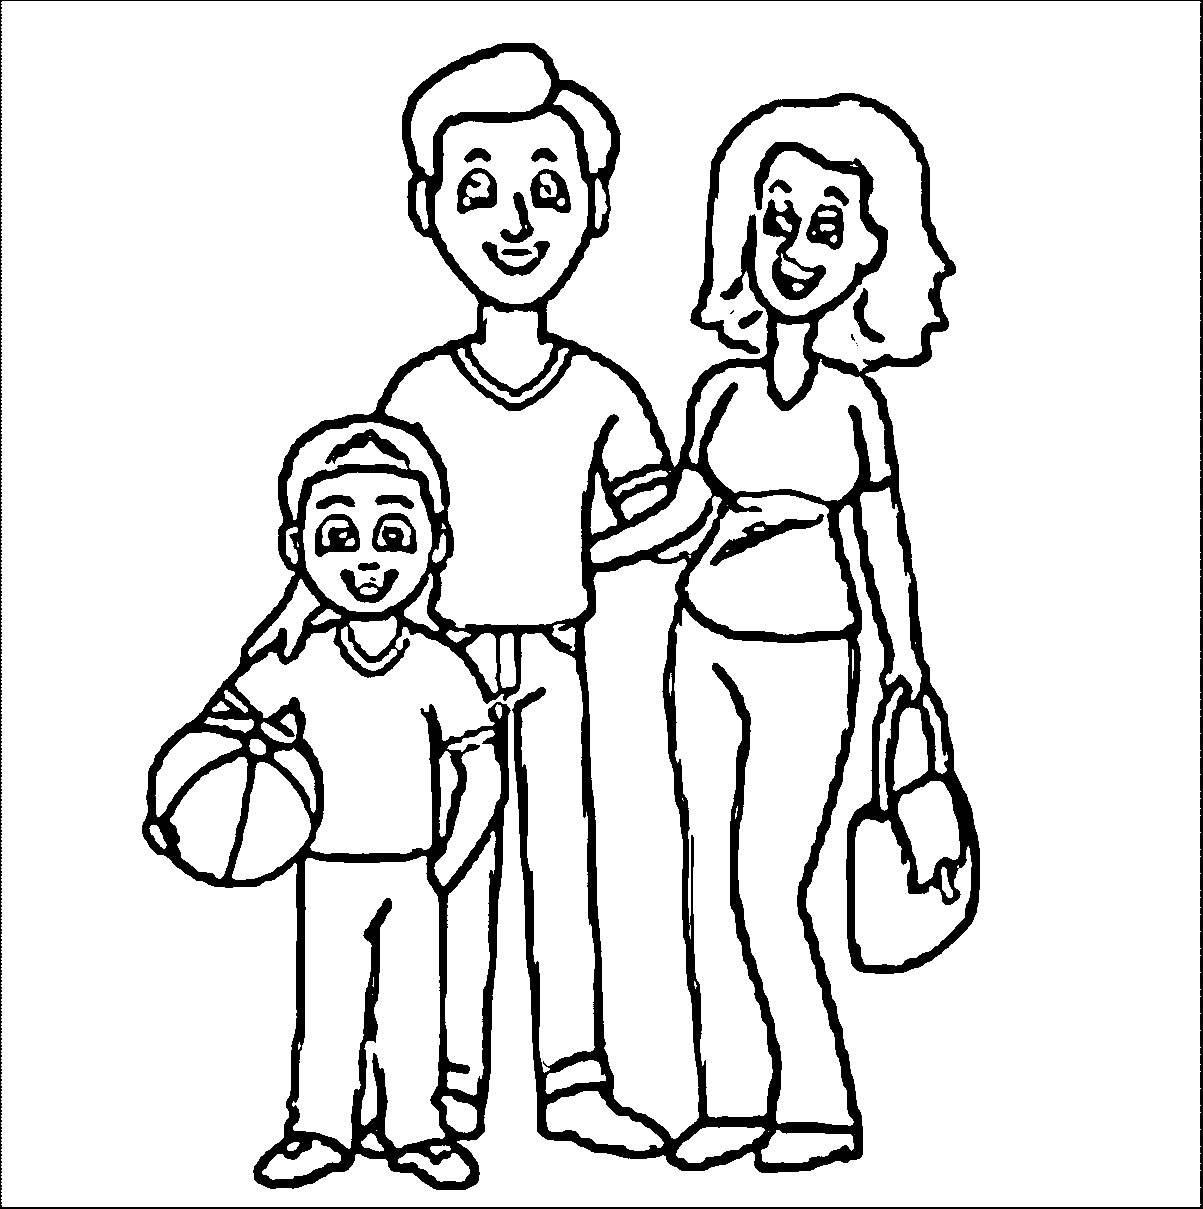 Free Coloring Page Of A Family Download Free Coloring Page Of A Family Png Images Free Cliparts On Clipart Library